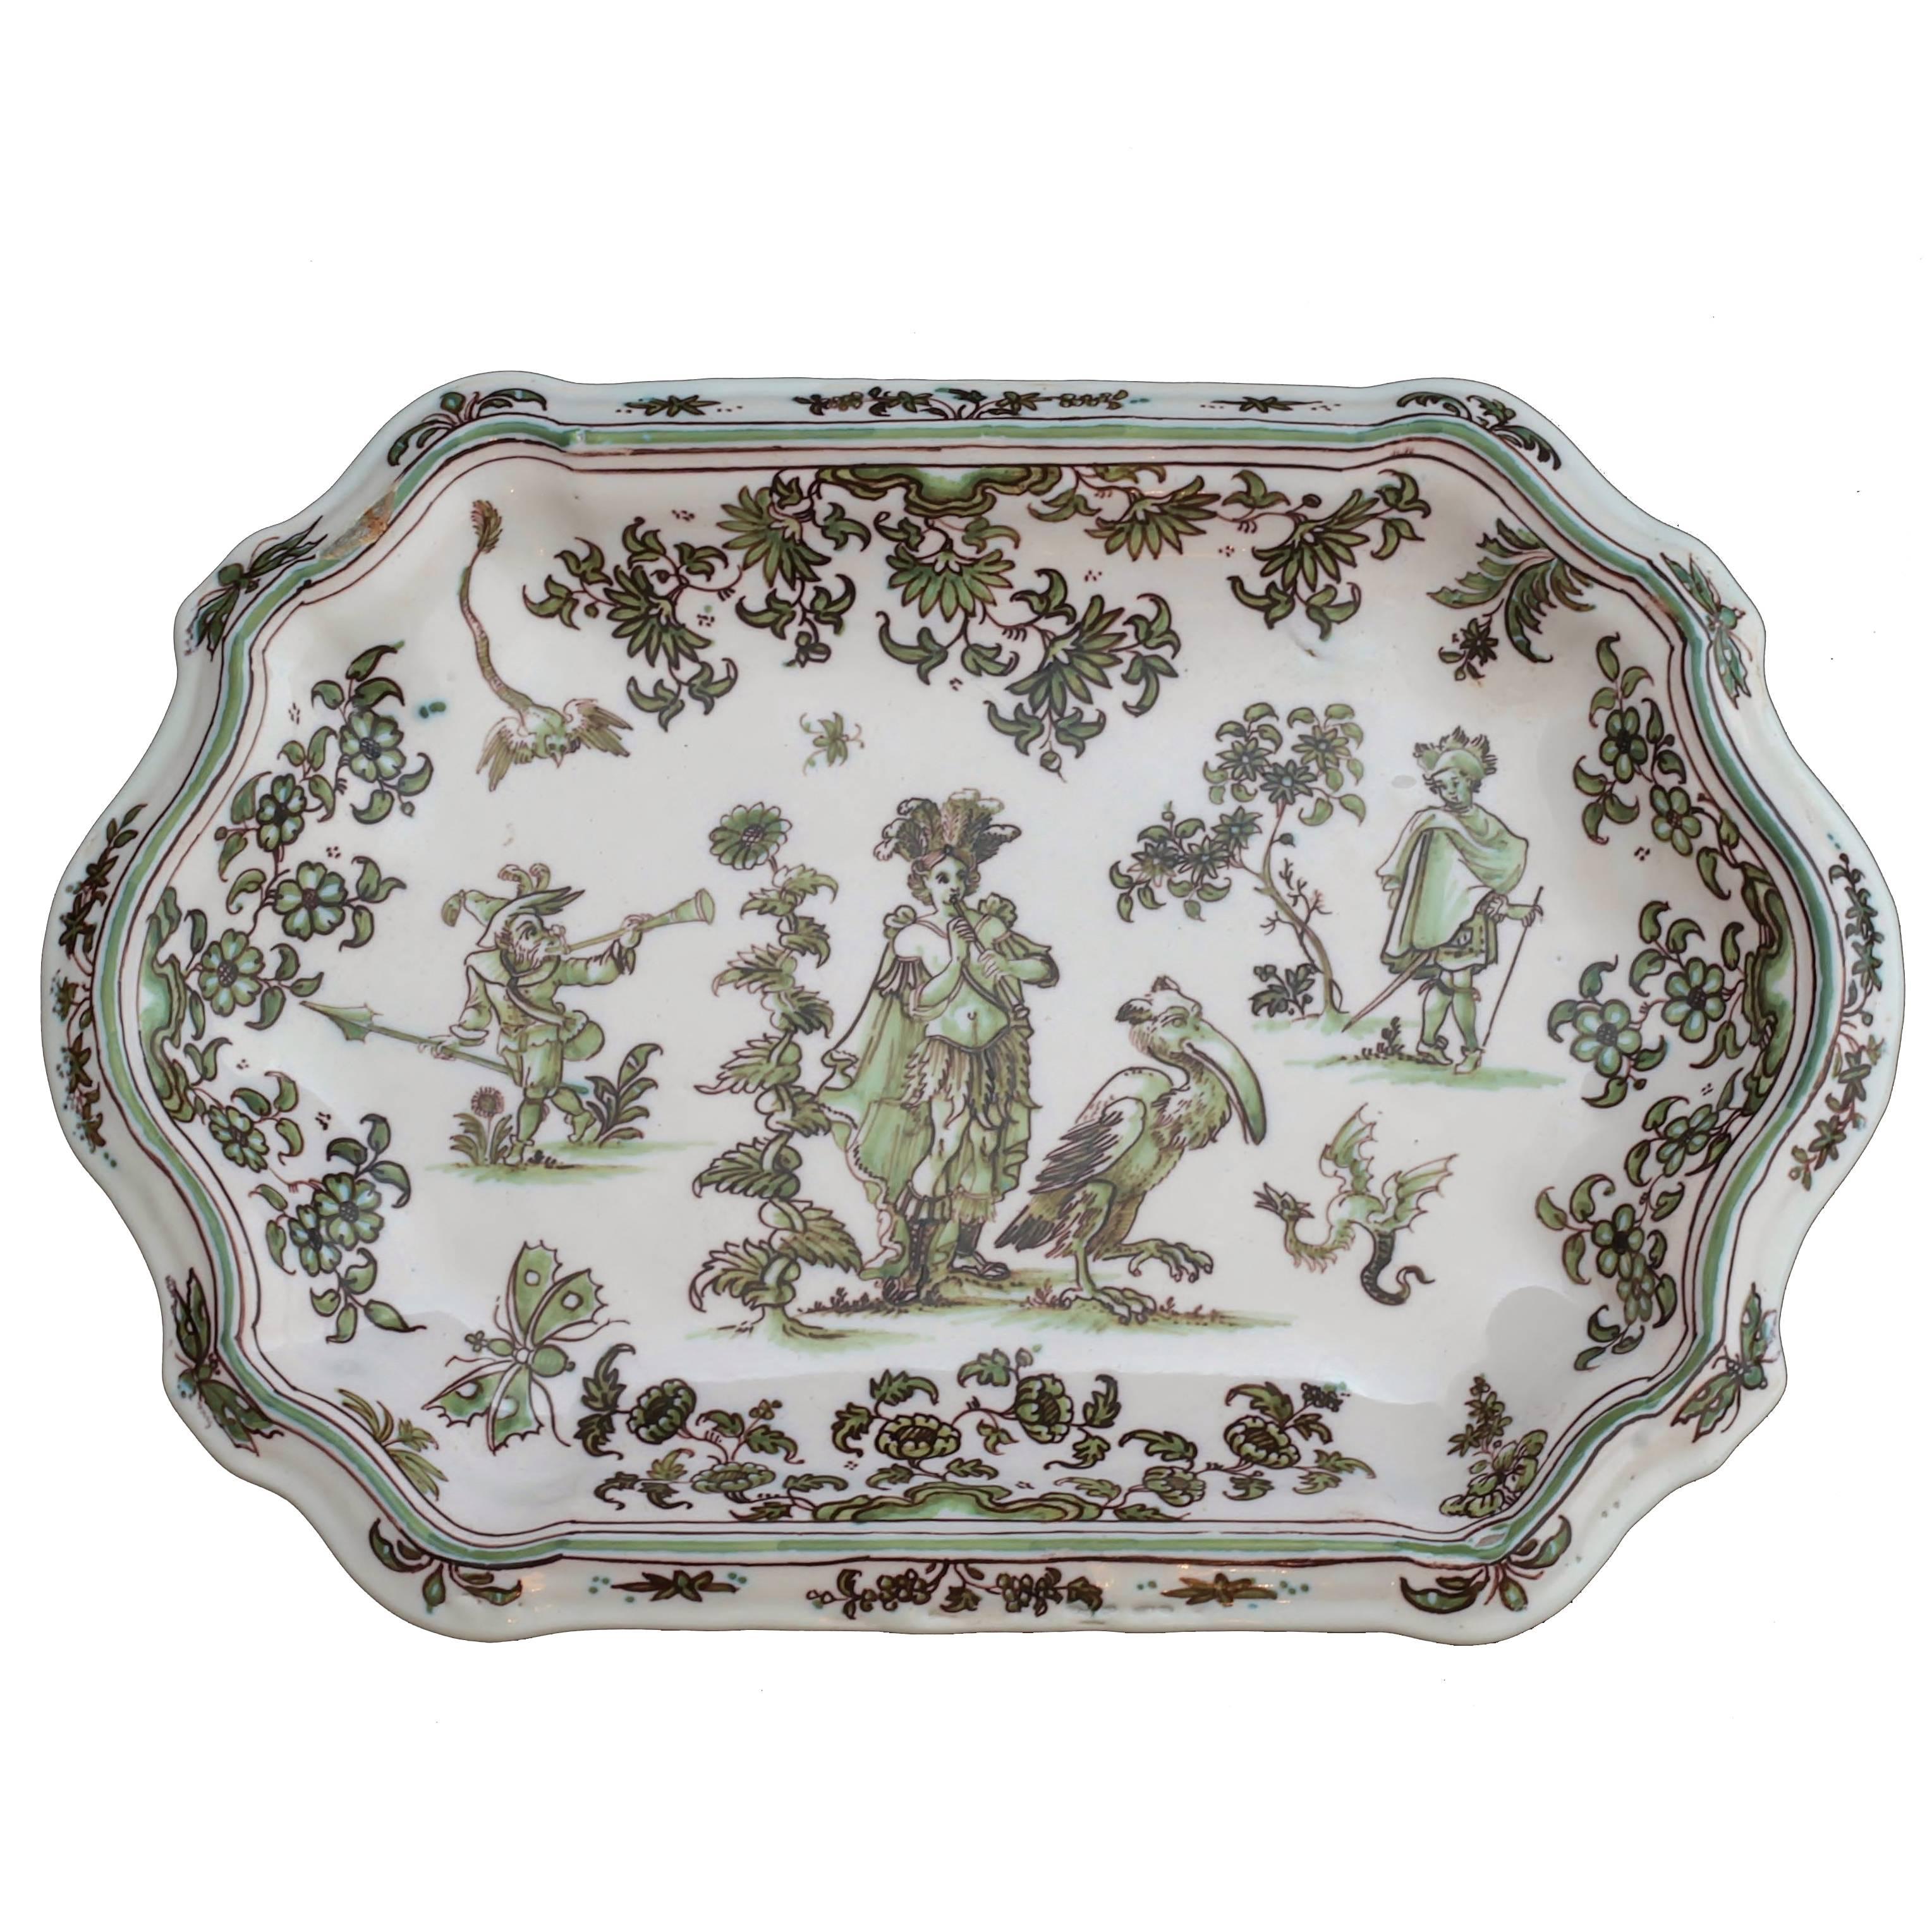 Tray in Faience of Moustiers ‘France’ with Grotesques, 18th Century